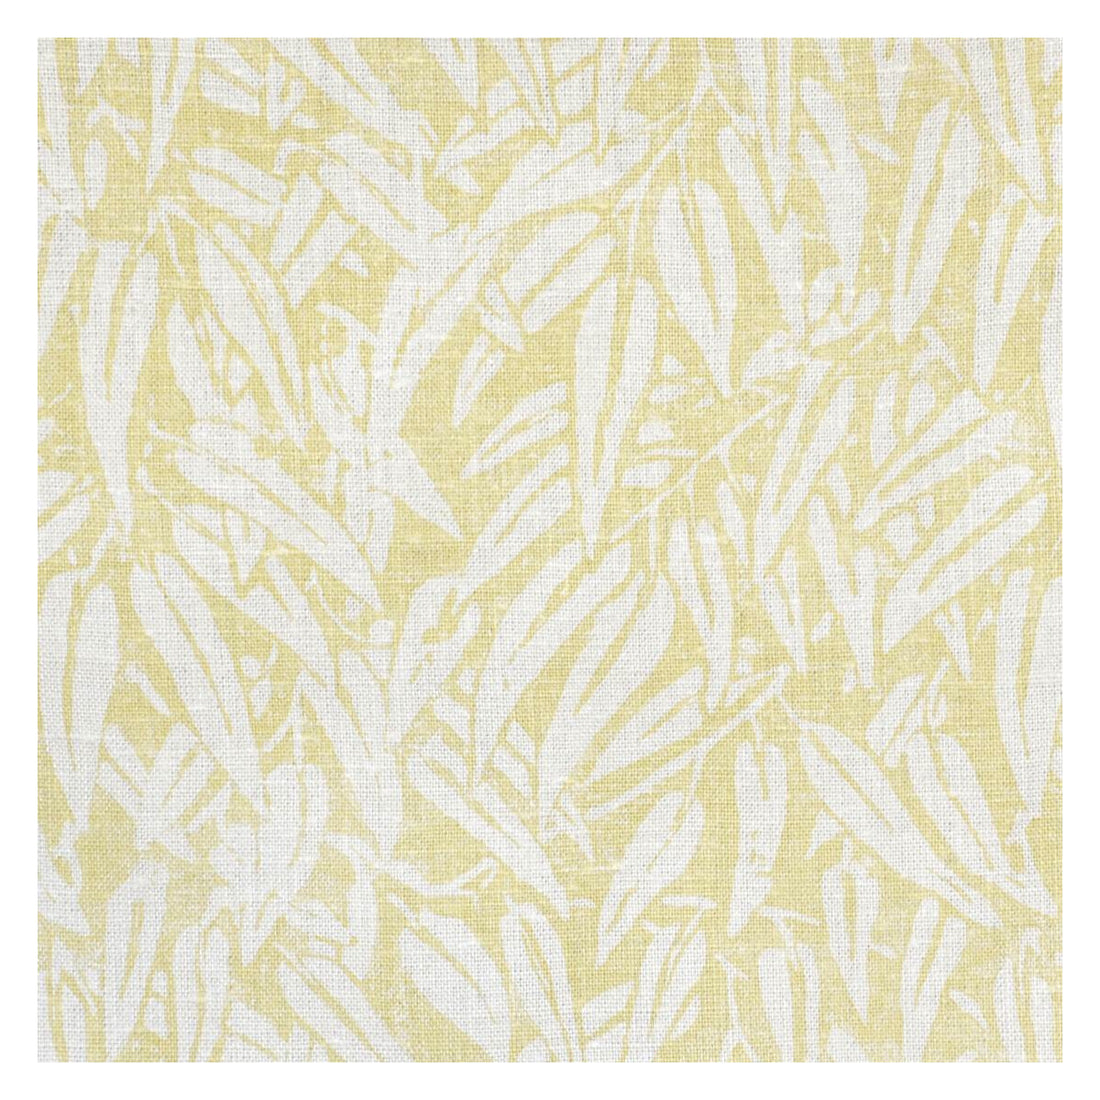 Willow fabric in yellow color - pattern BFC-3513.40.0 - by Lee Jofa in the Blithfield collection